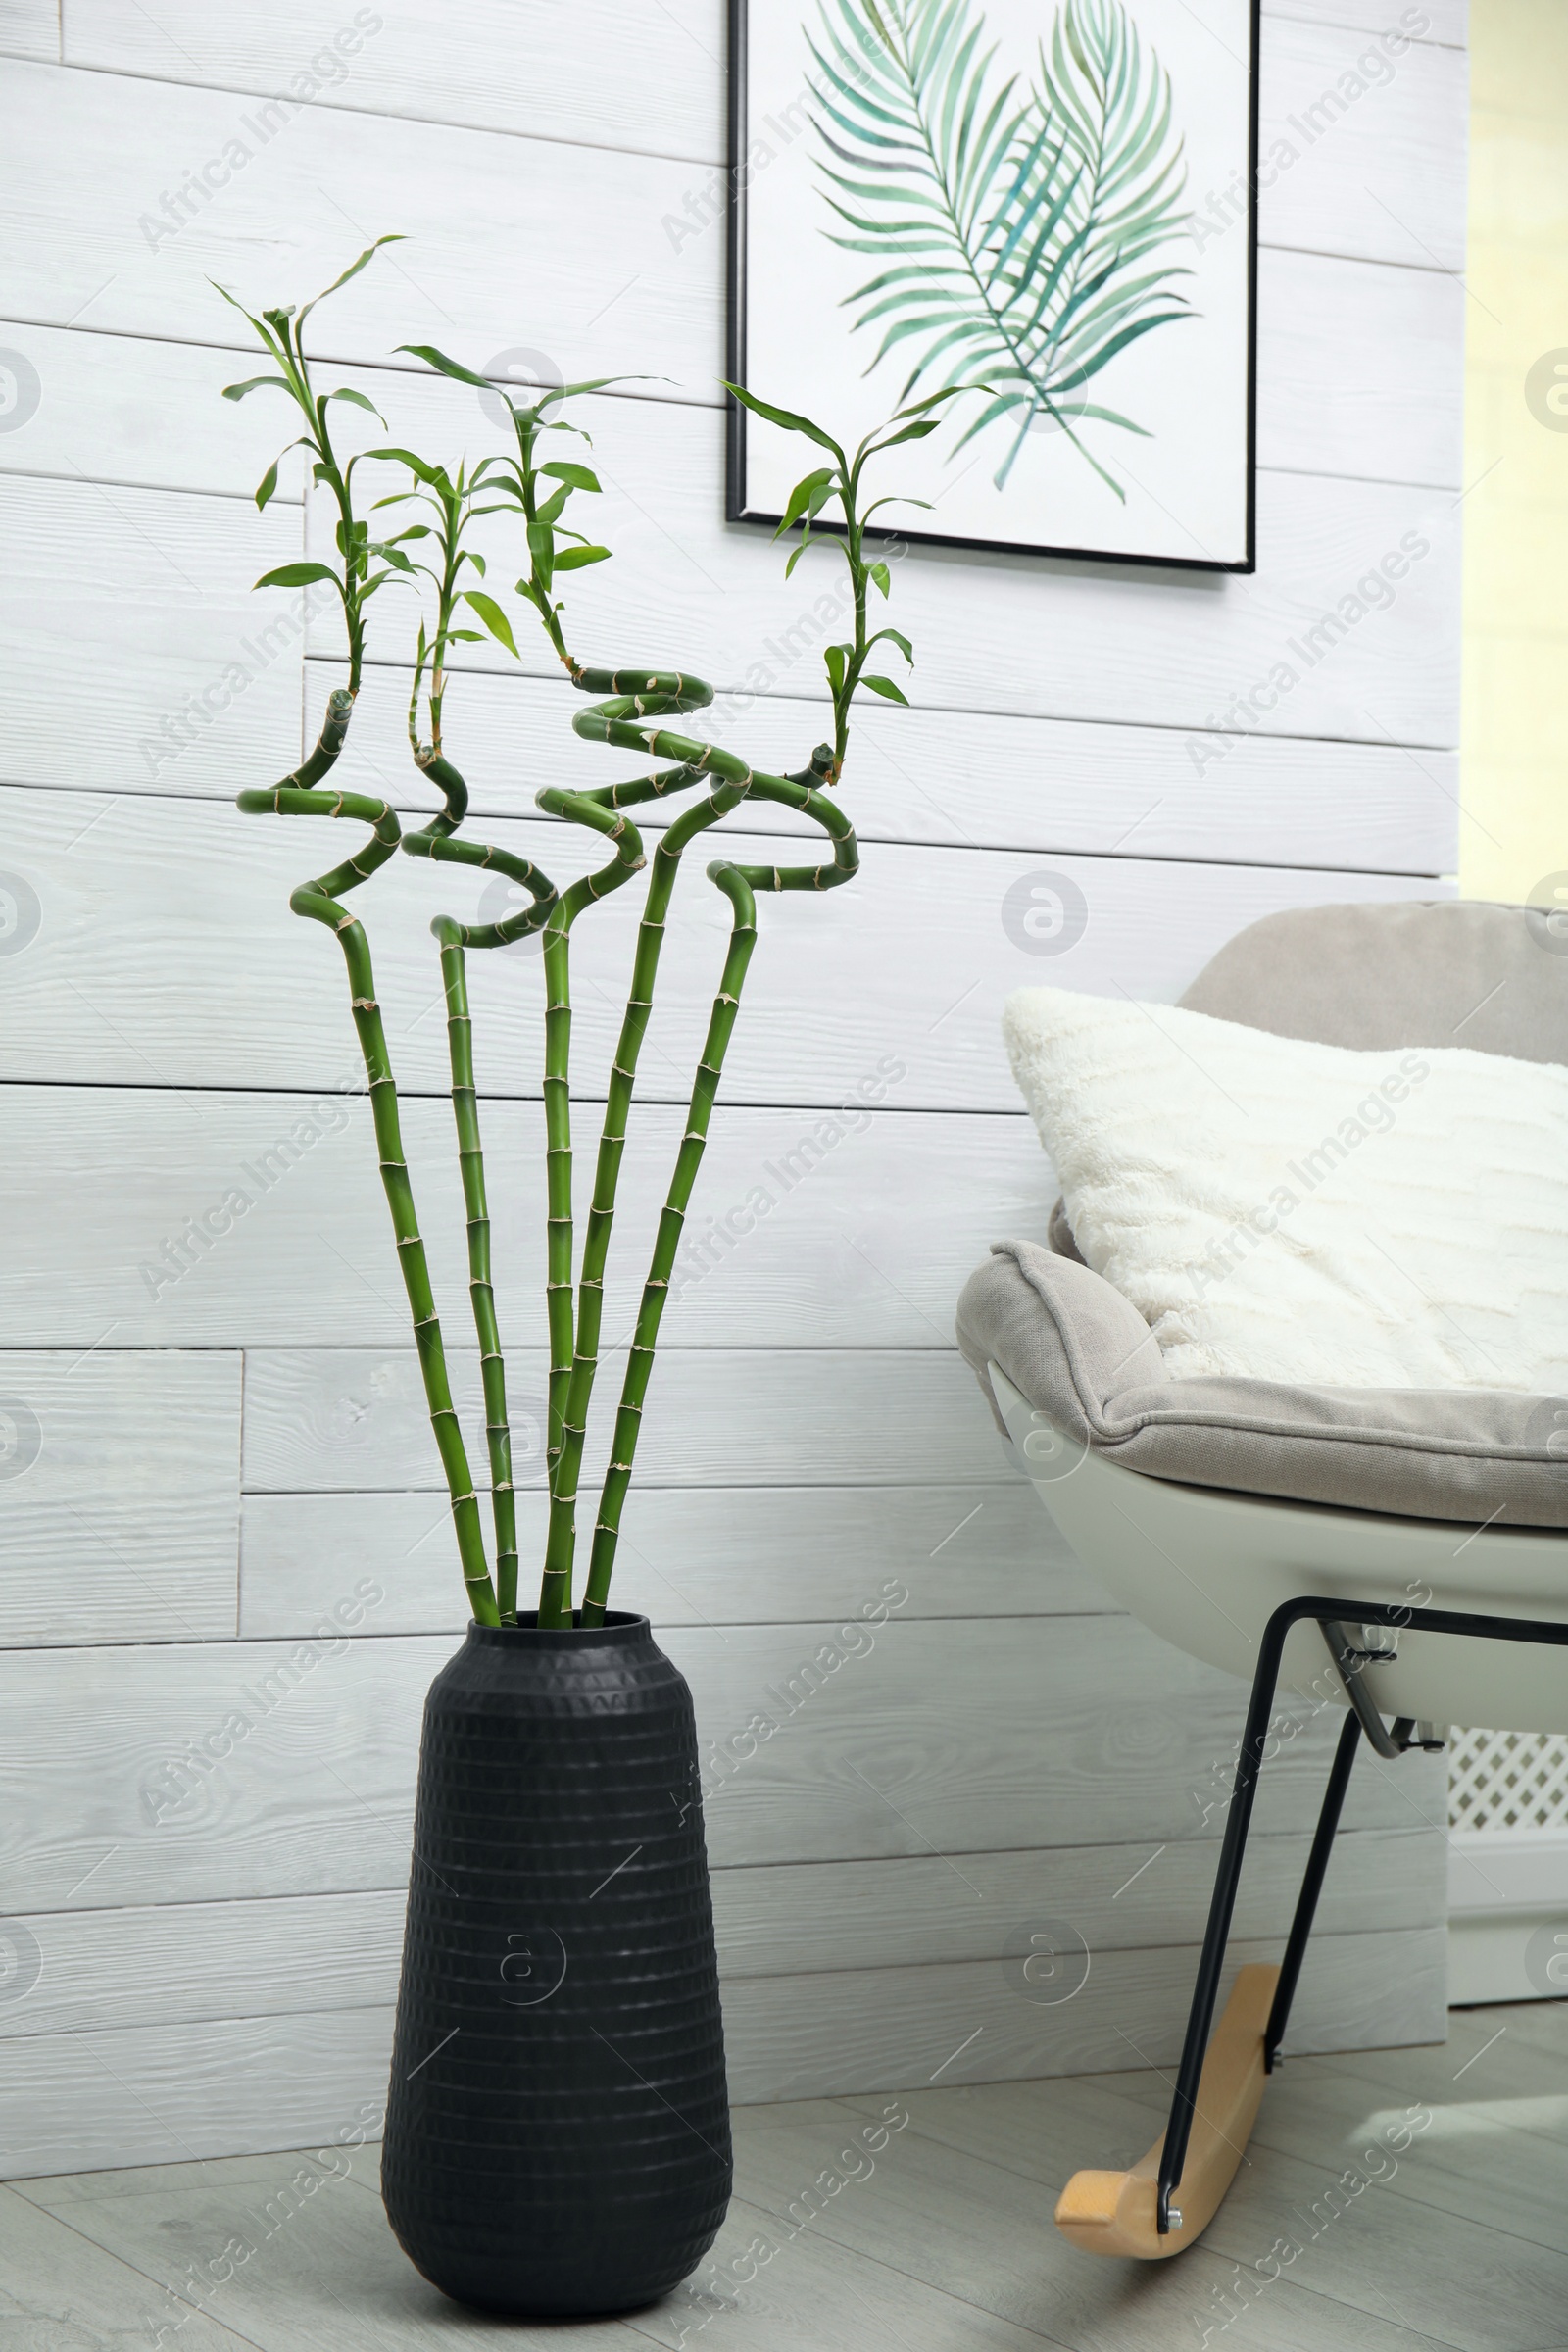 Photo of Vase with green bamboo stems and stylish rocking chair in room. Interior design